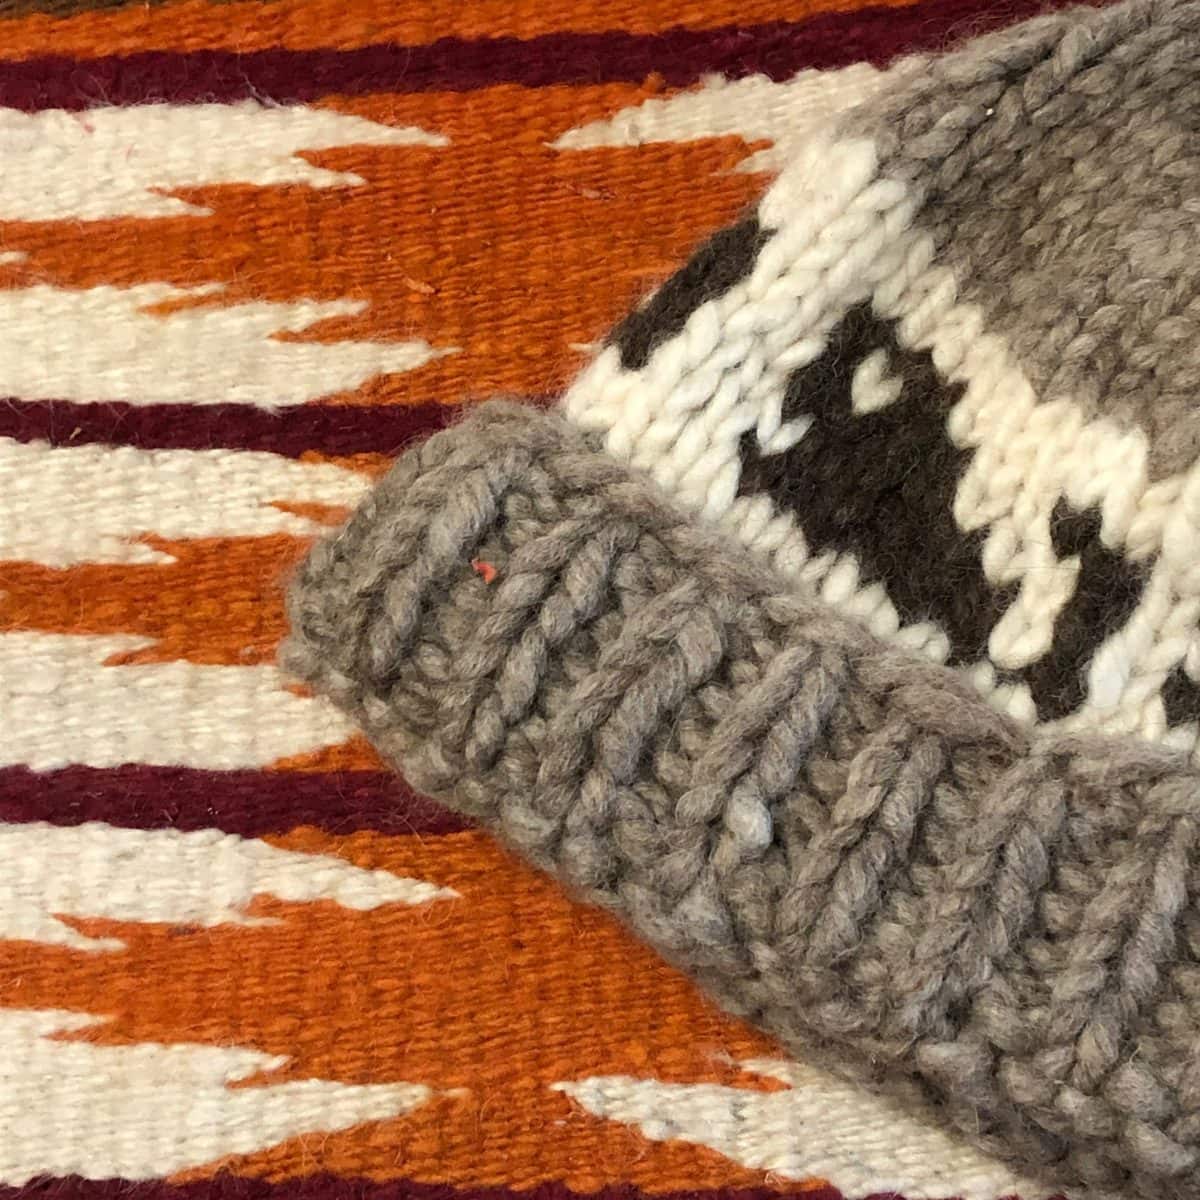 image description: a close up of a Navajo woven cloth and a hat knitted in the Salish style